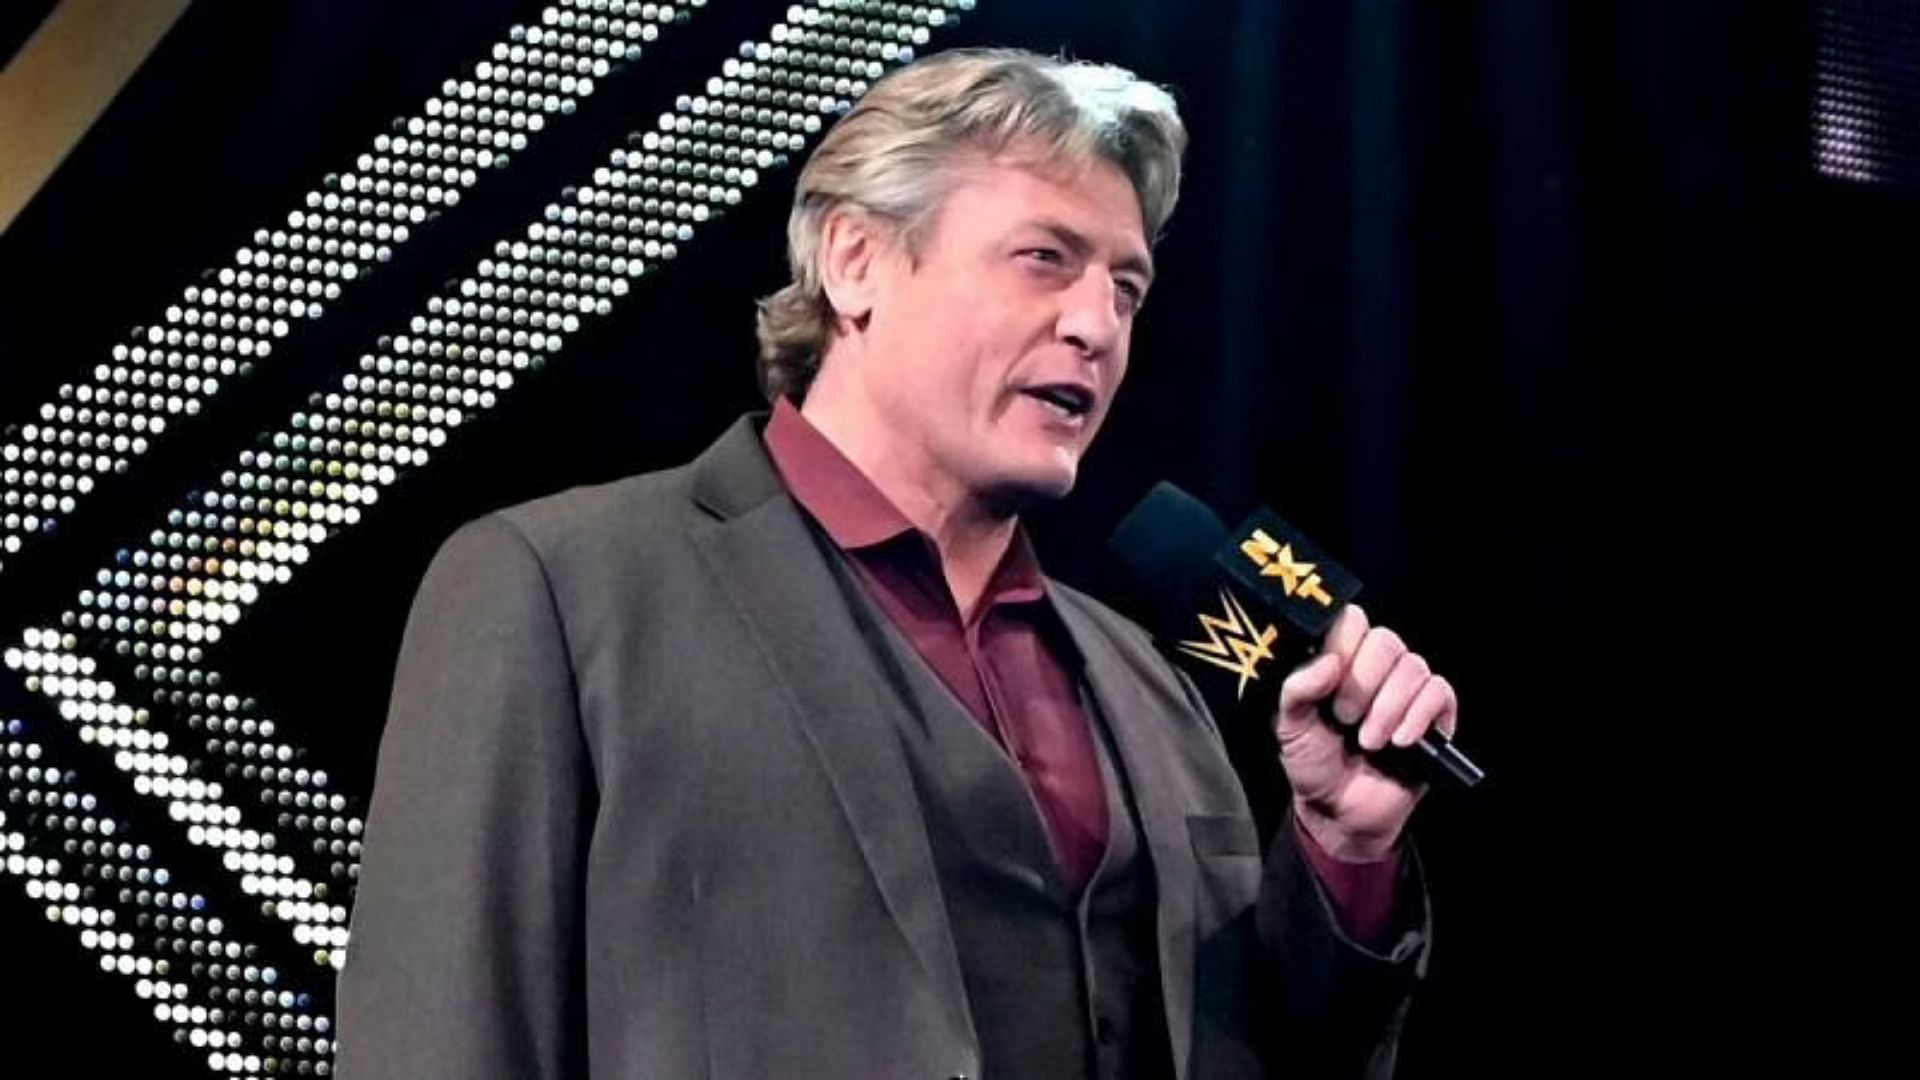 William Regal worked for WWE for 21 years!